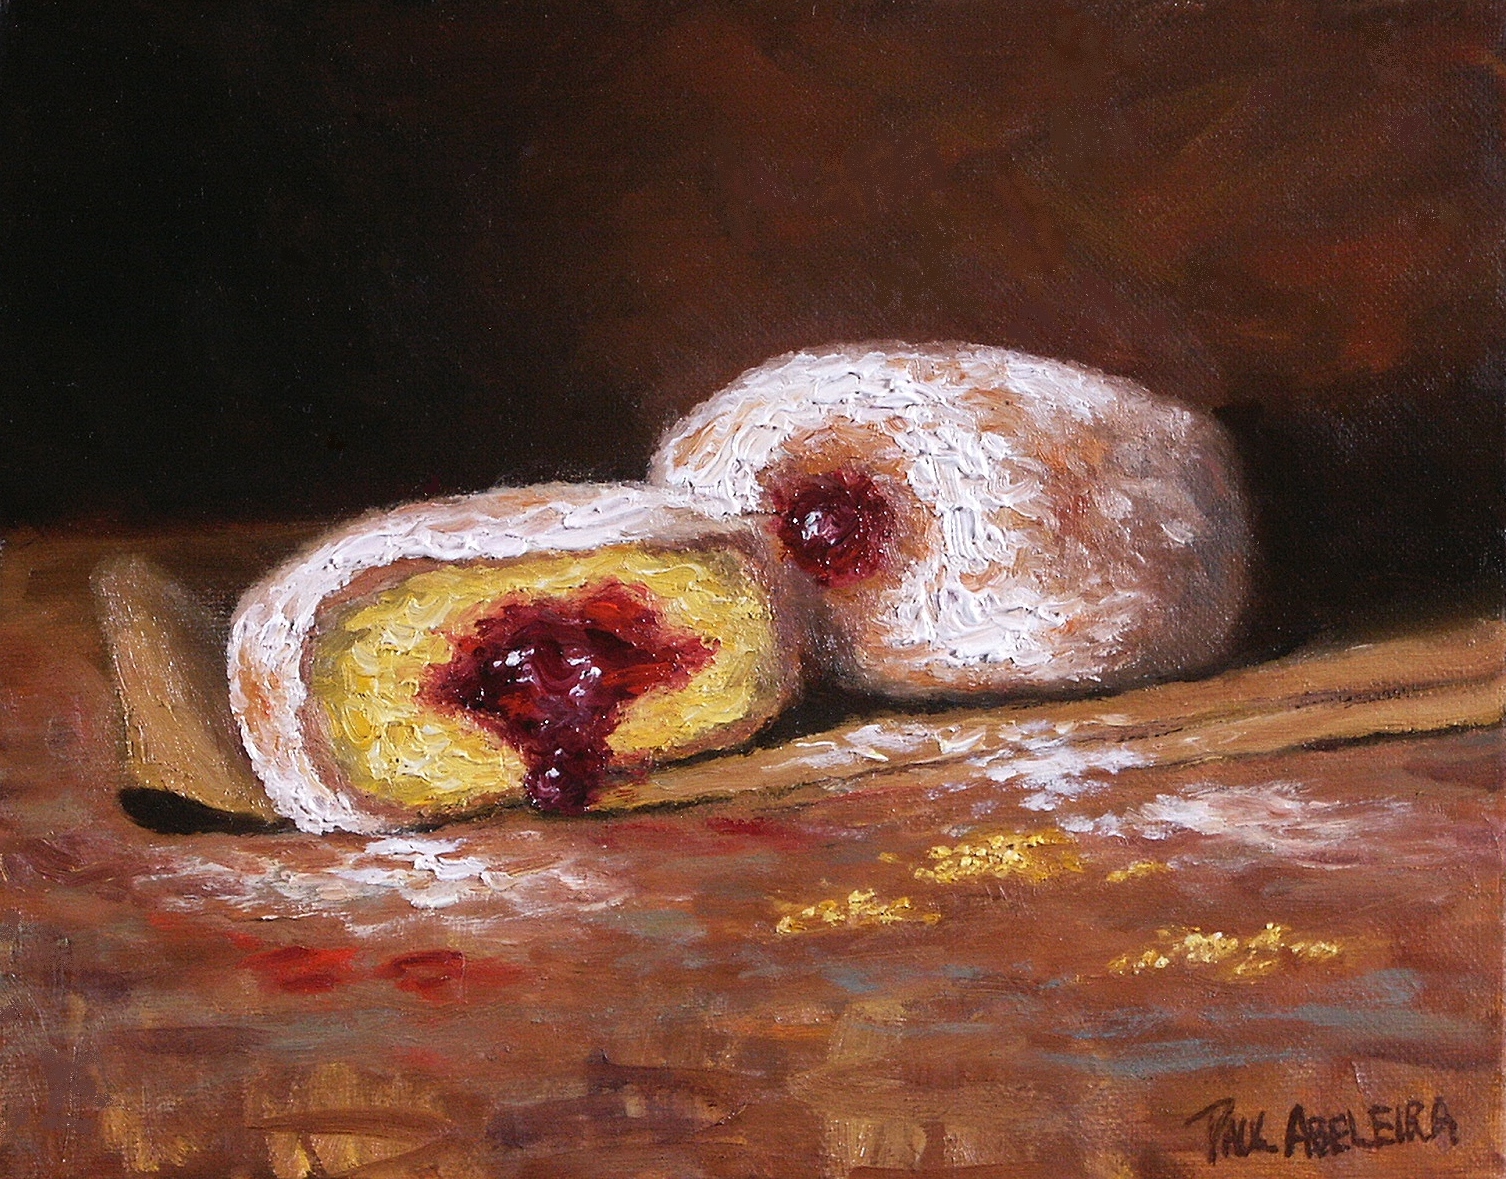 "Jelly Donuts" by Paul Abeleira